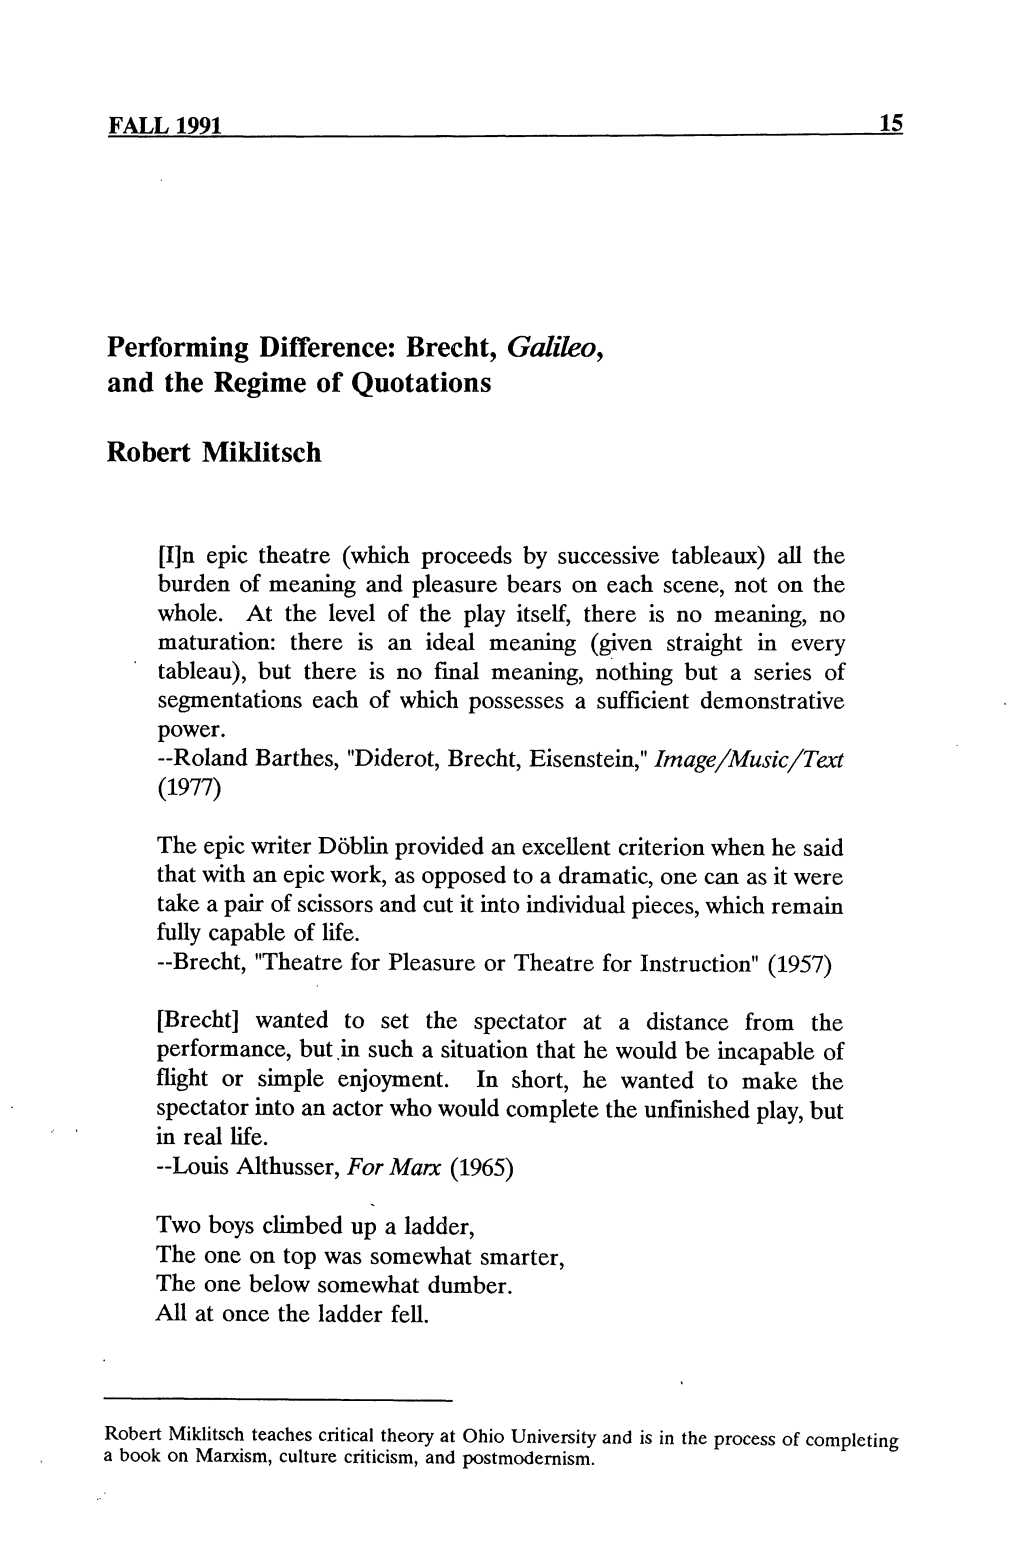 Brecht, Galileo, and the Regime of Quotations Robert Miklitsch